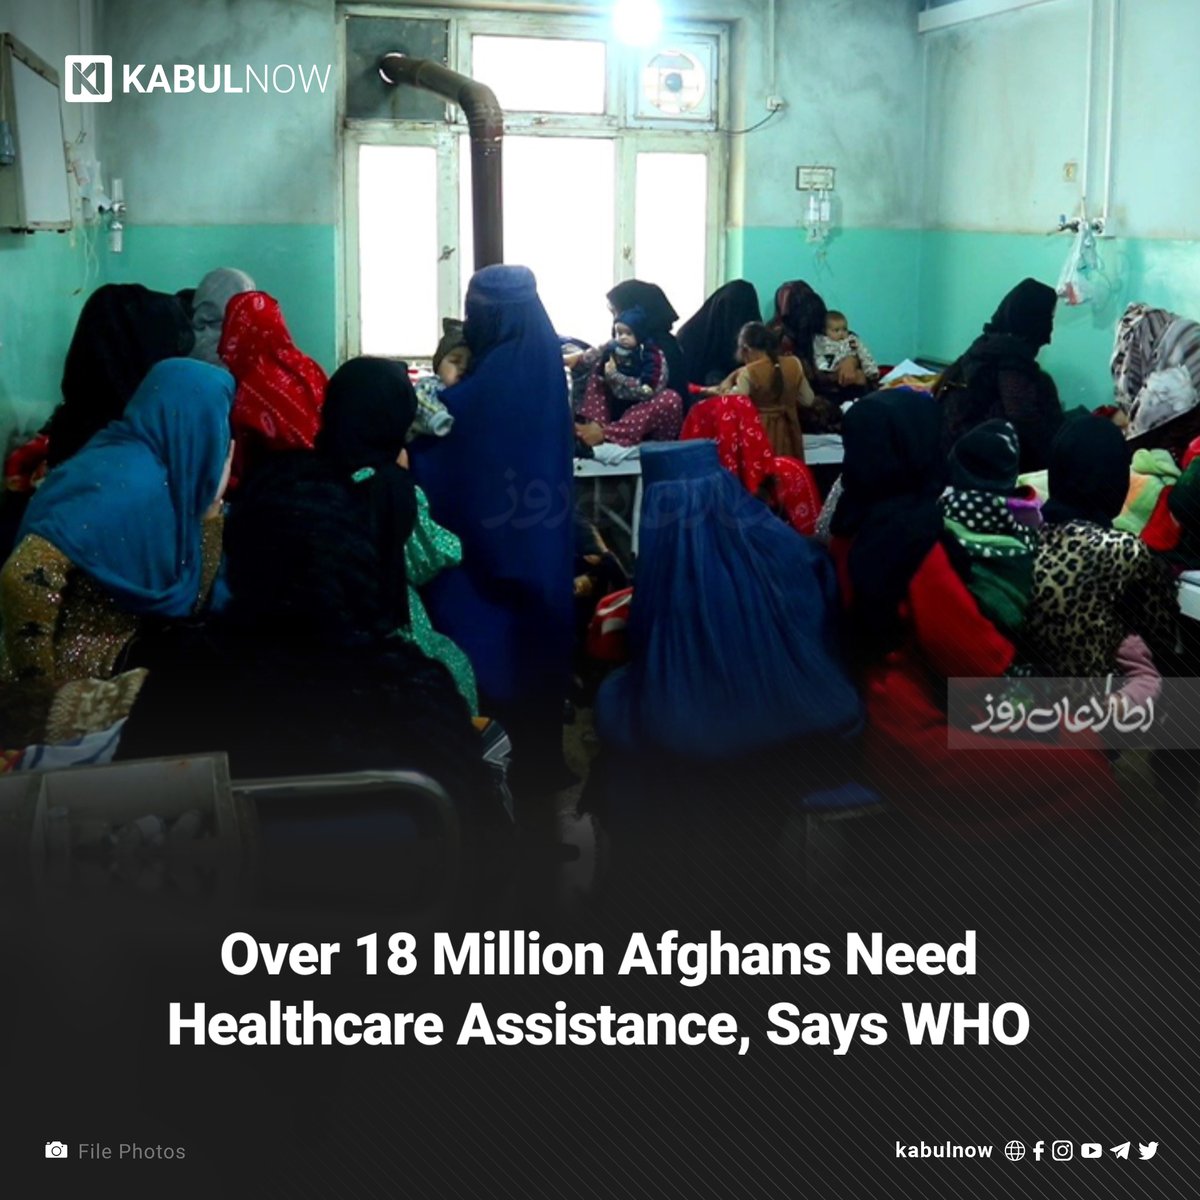 The World Health Organization (WHO) says that access to quality healthcare remains a pressing issue in Afghanistan, with over 18 million people depending on humanitarian health assistance in the country. Read more here: kabulnow.com/?p=35296